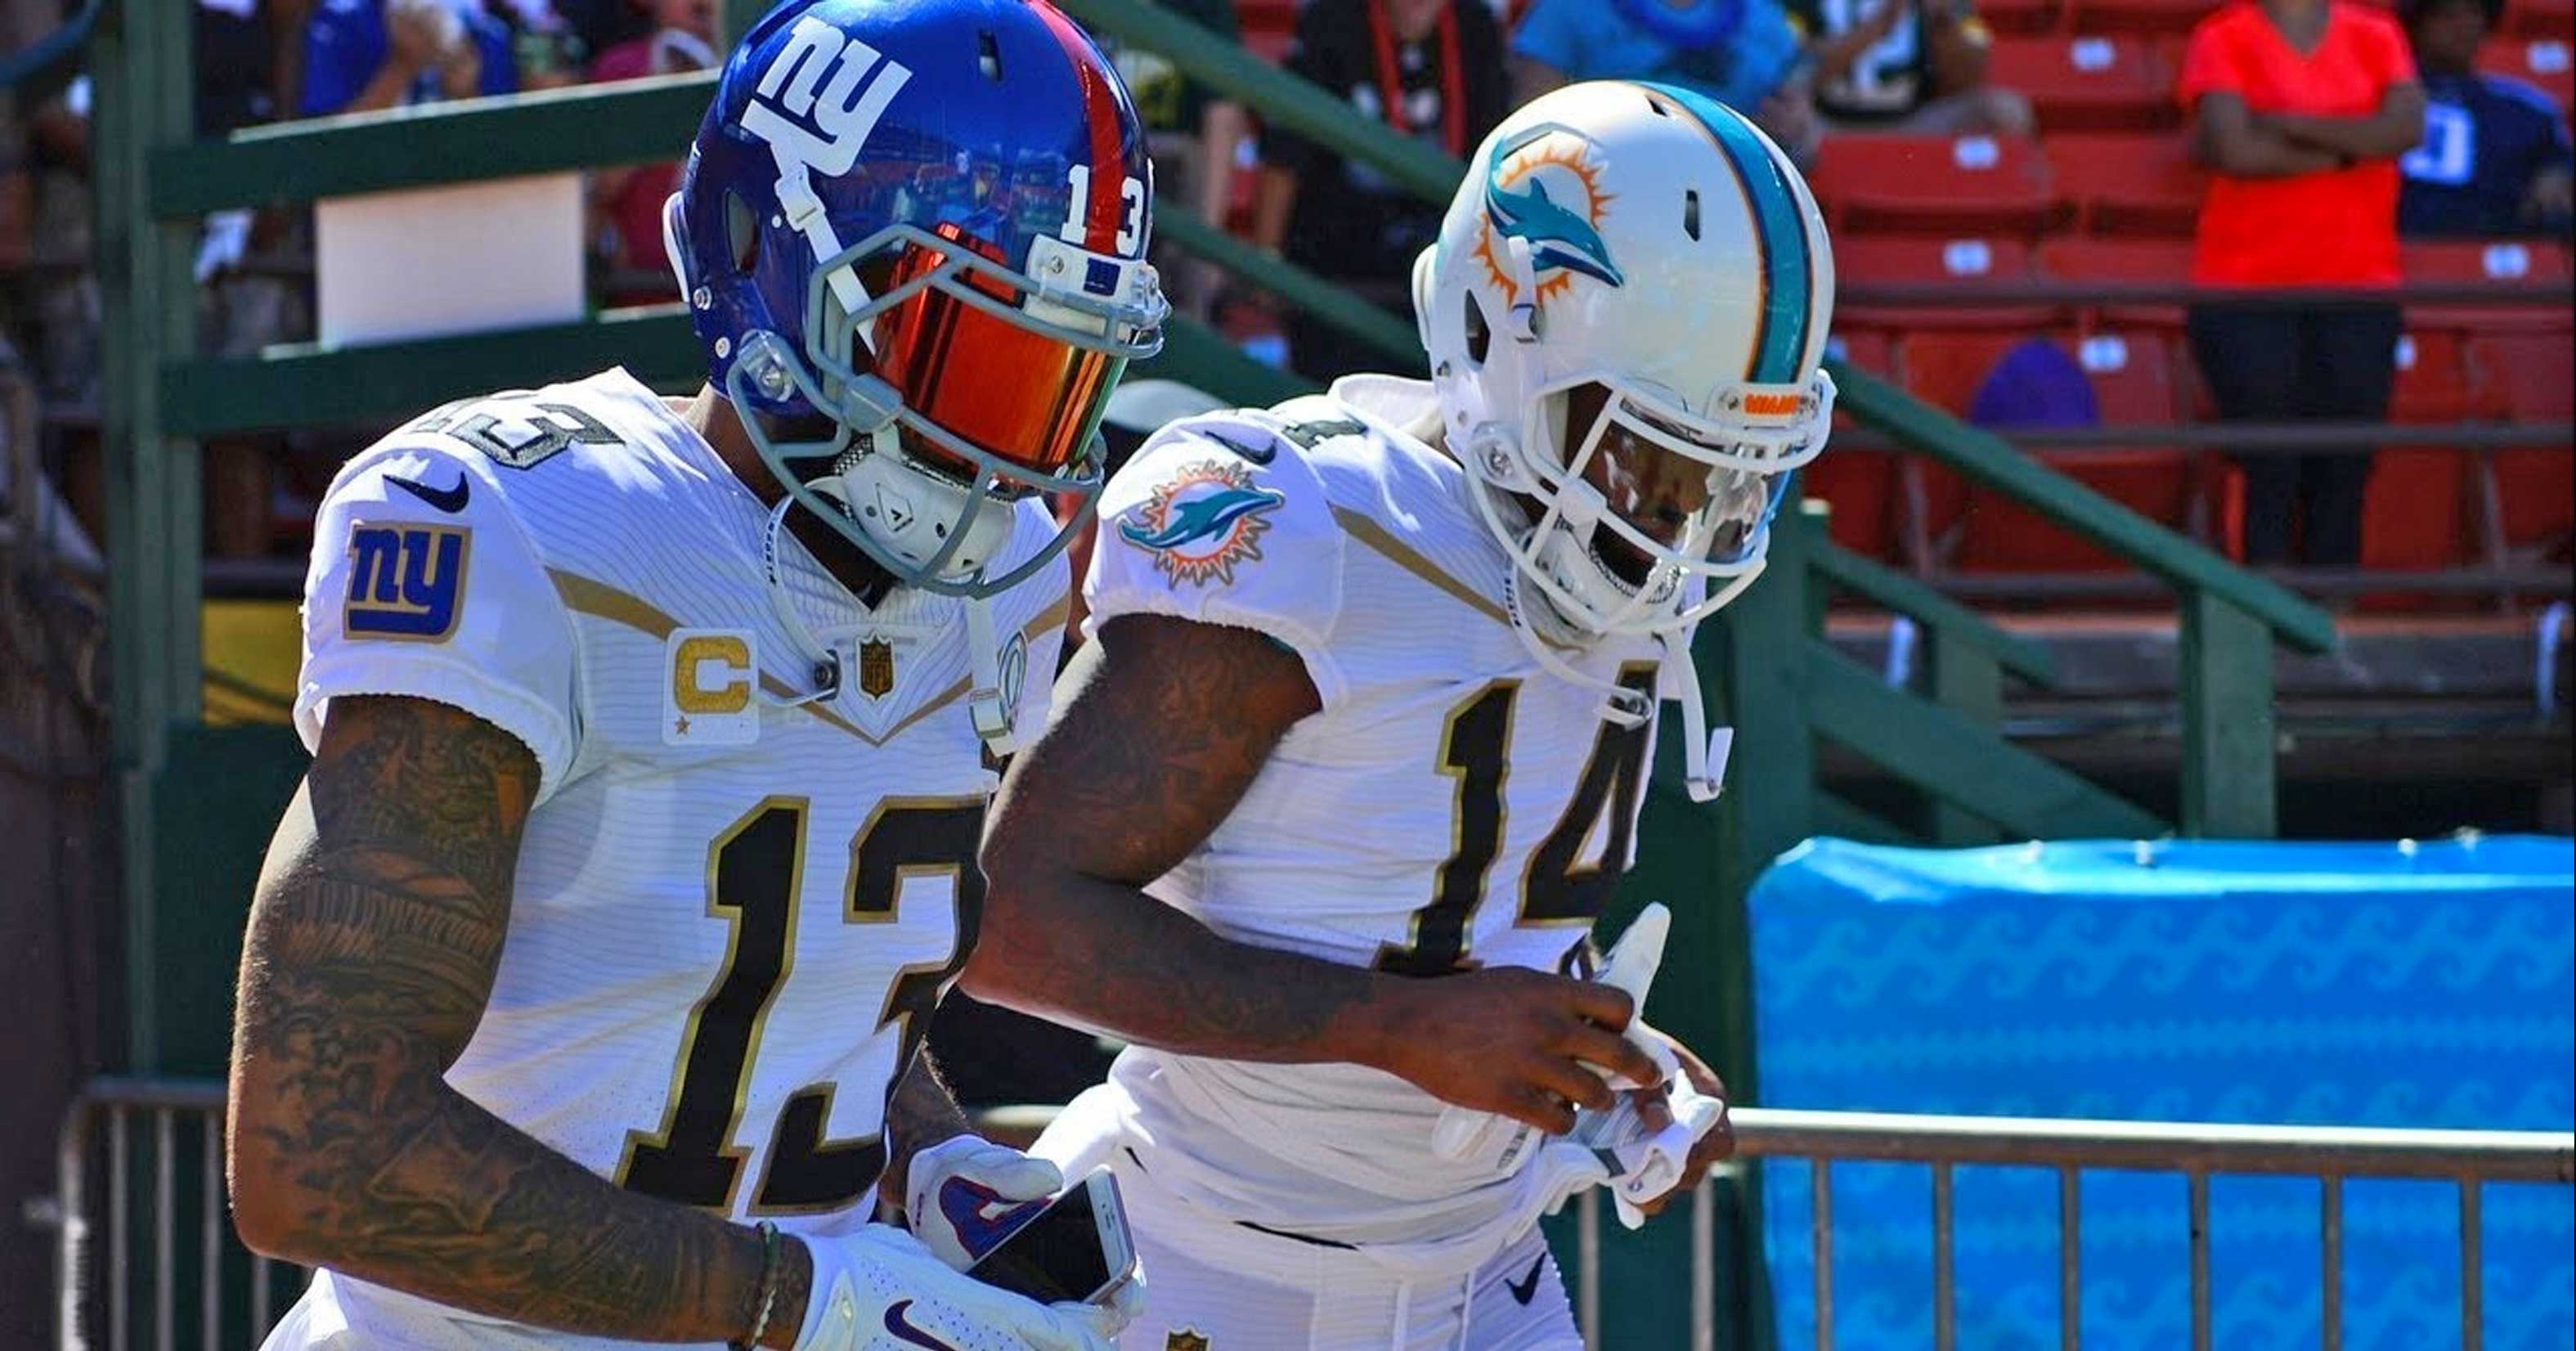 New Browns Wr Jarvis Landry Recruiting Odell Beckham Jr To